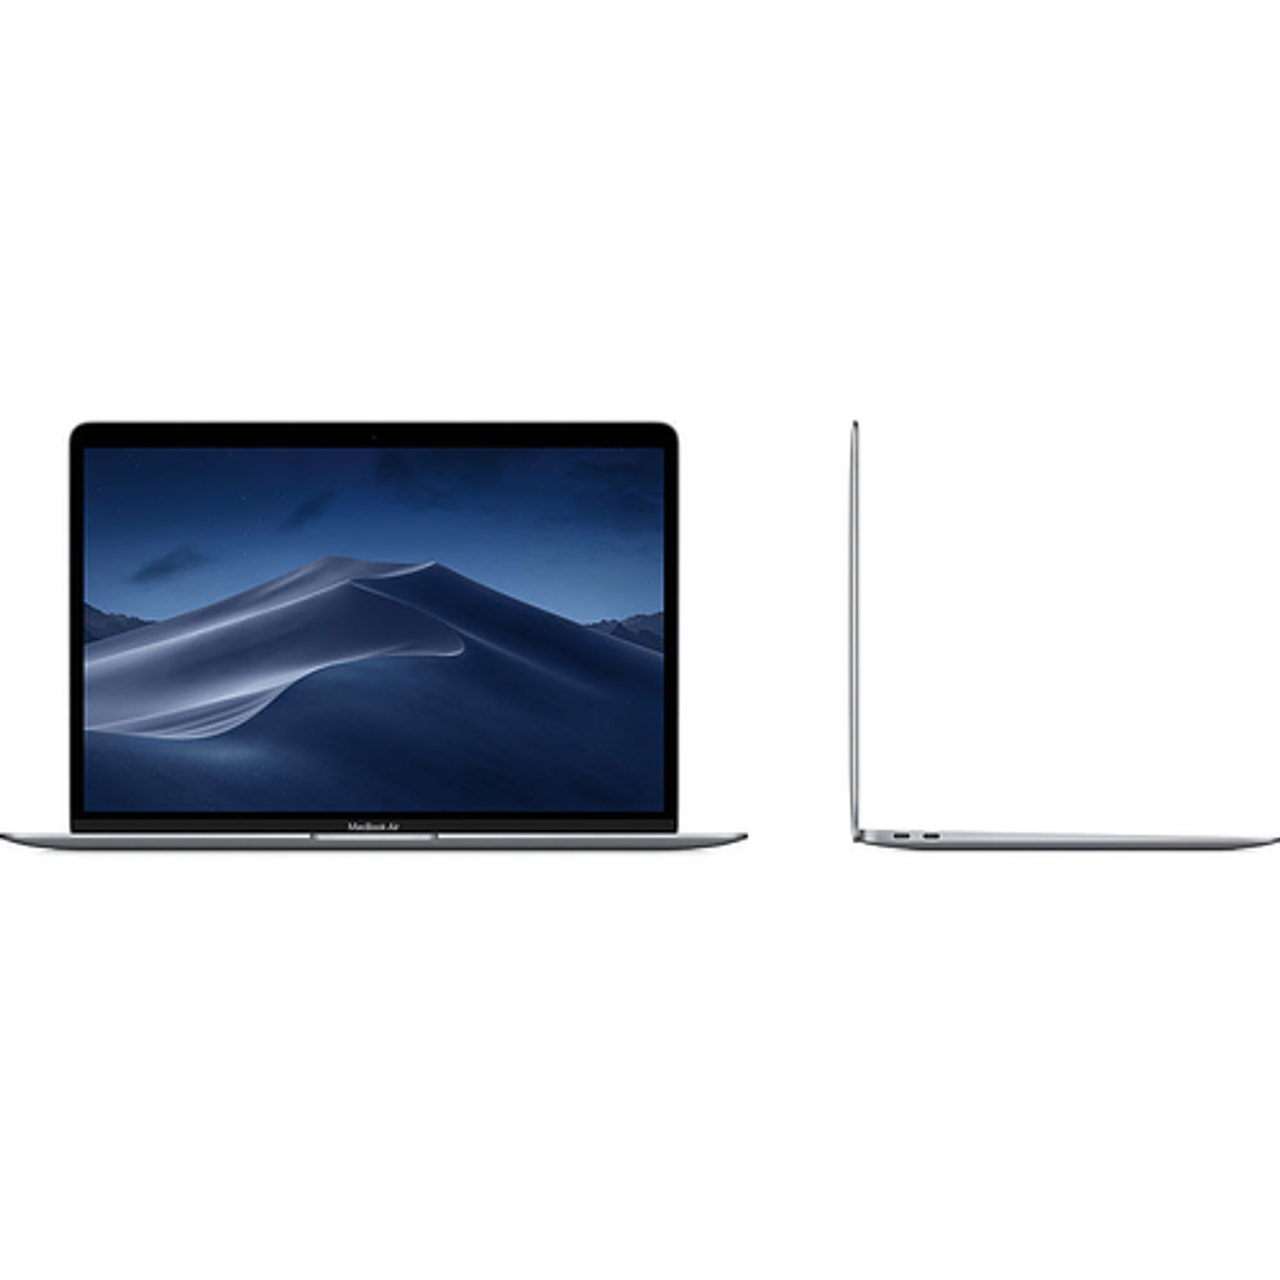 Apple MacBook Air 13.3" Certified Refurbished - Intel Core i5 1.6 with 8GB Memory - 128GB SSD (2018) - Space Gray